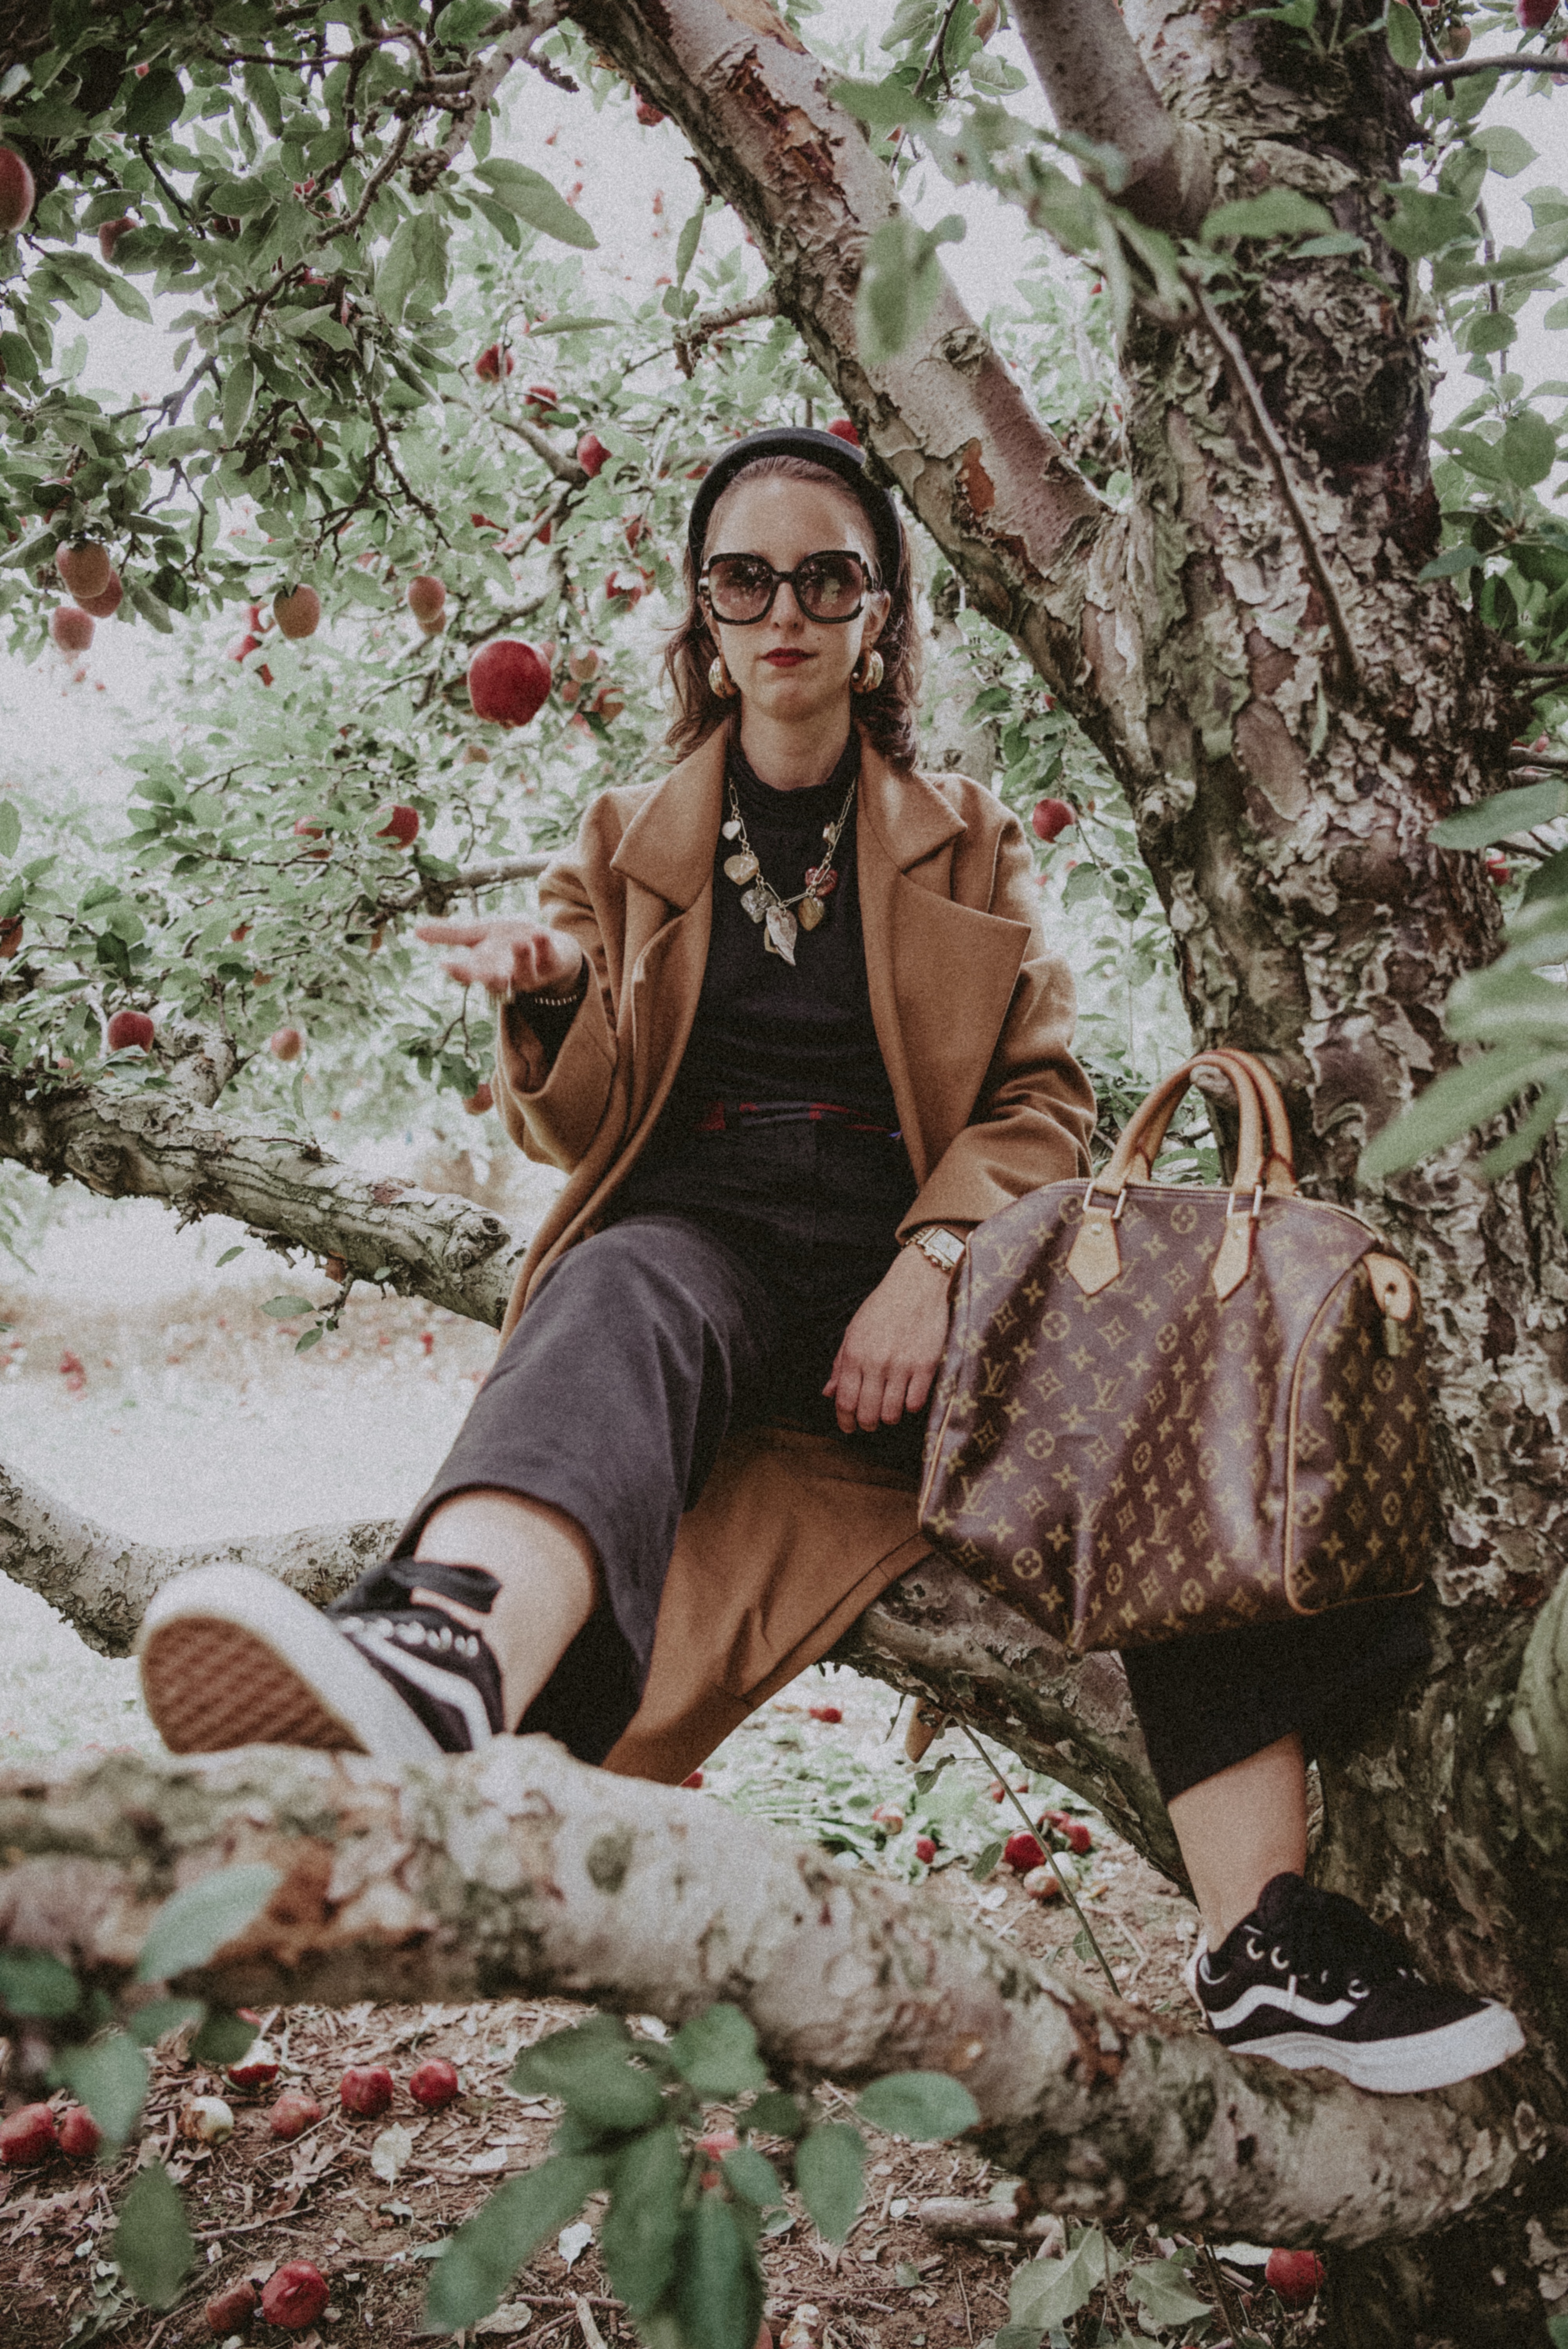 Girls Trip Apple Picking and Pumpkin Picking Outside of NYC - Simply by Simone - Simone Piliero - Photographer Riley McCarthy - Fall Fashion - Fall Outfit - Fall Style - Apples - Tree - Louis Vuitton #fashion - Camel Coat - Black Jeans - Vans Sneakers - fashion poses - #outfit #style #fallfashion #falloutfit #westchestercounty #dutchesscounty #nyc #northofnyc #suburbs #pumpkinpicking #bloggerstyle 